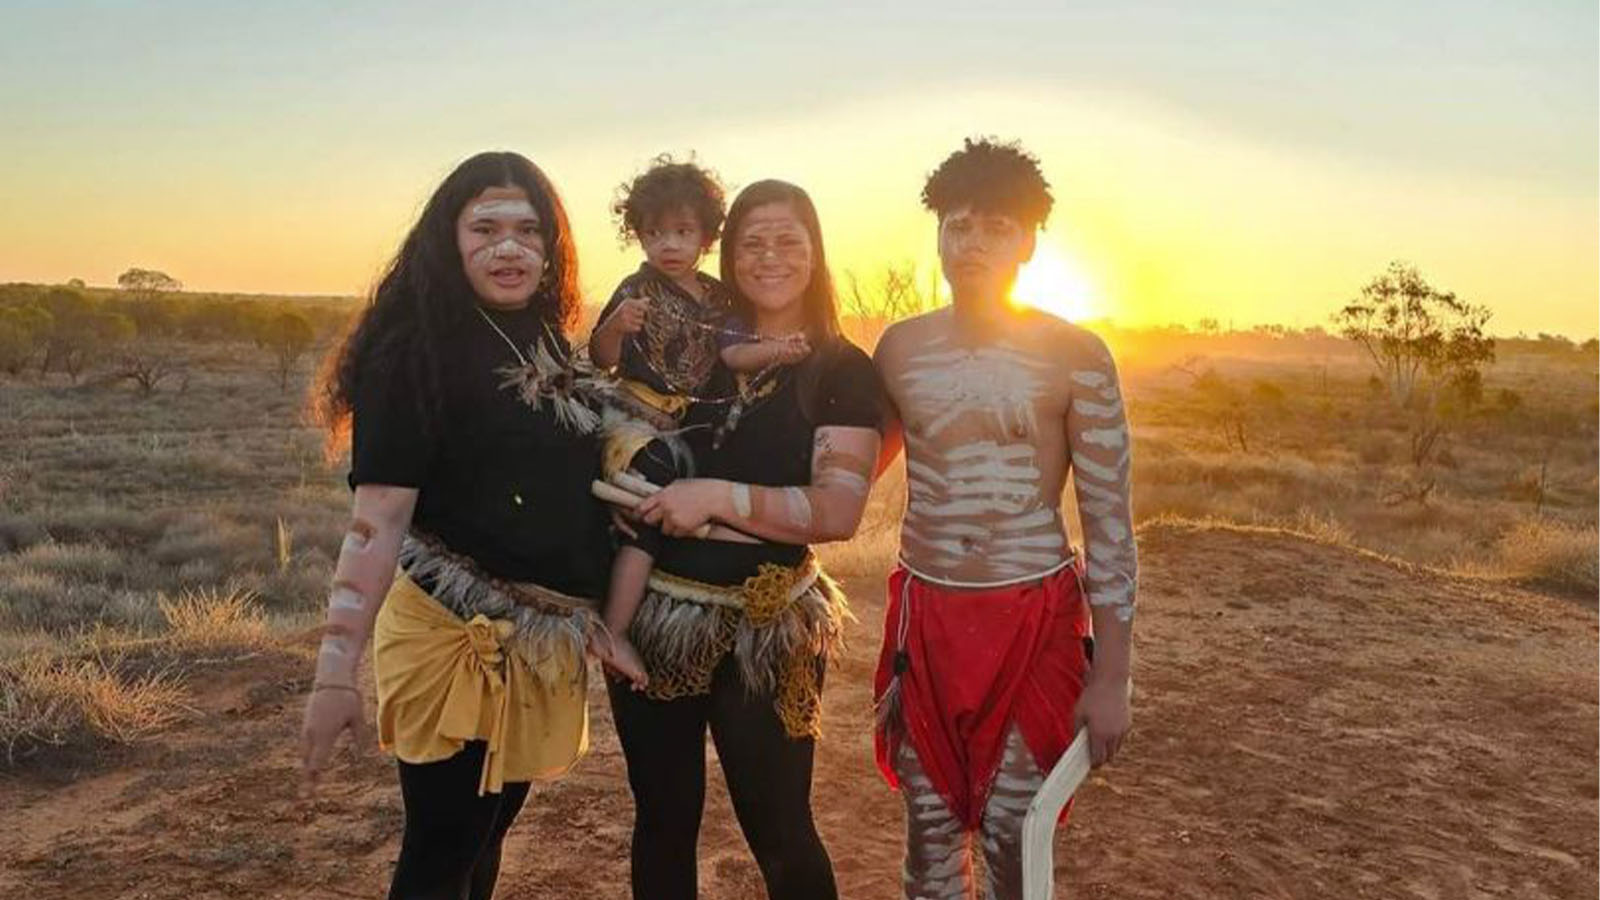 Shantelle Thomspon is standing against a sunset, holding a small child, with two teenagers by her side. The family is all wearing traditional Aboriginal body and face paint, and weaved skirts.